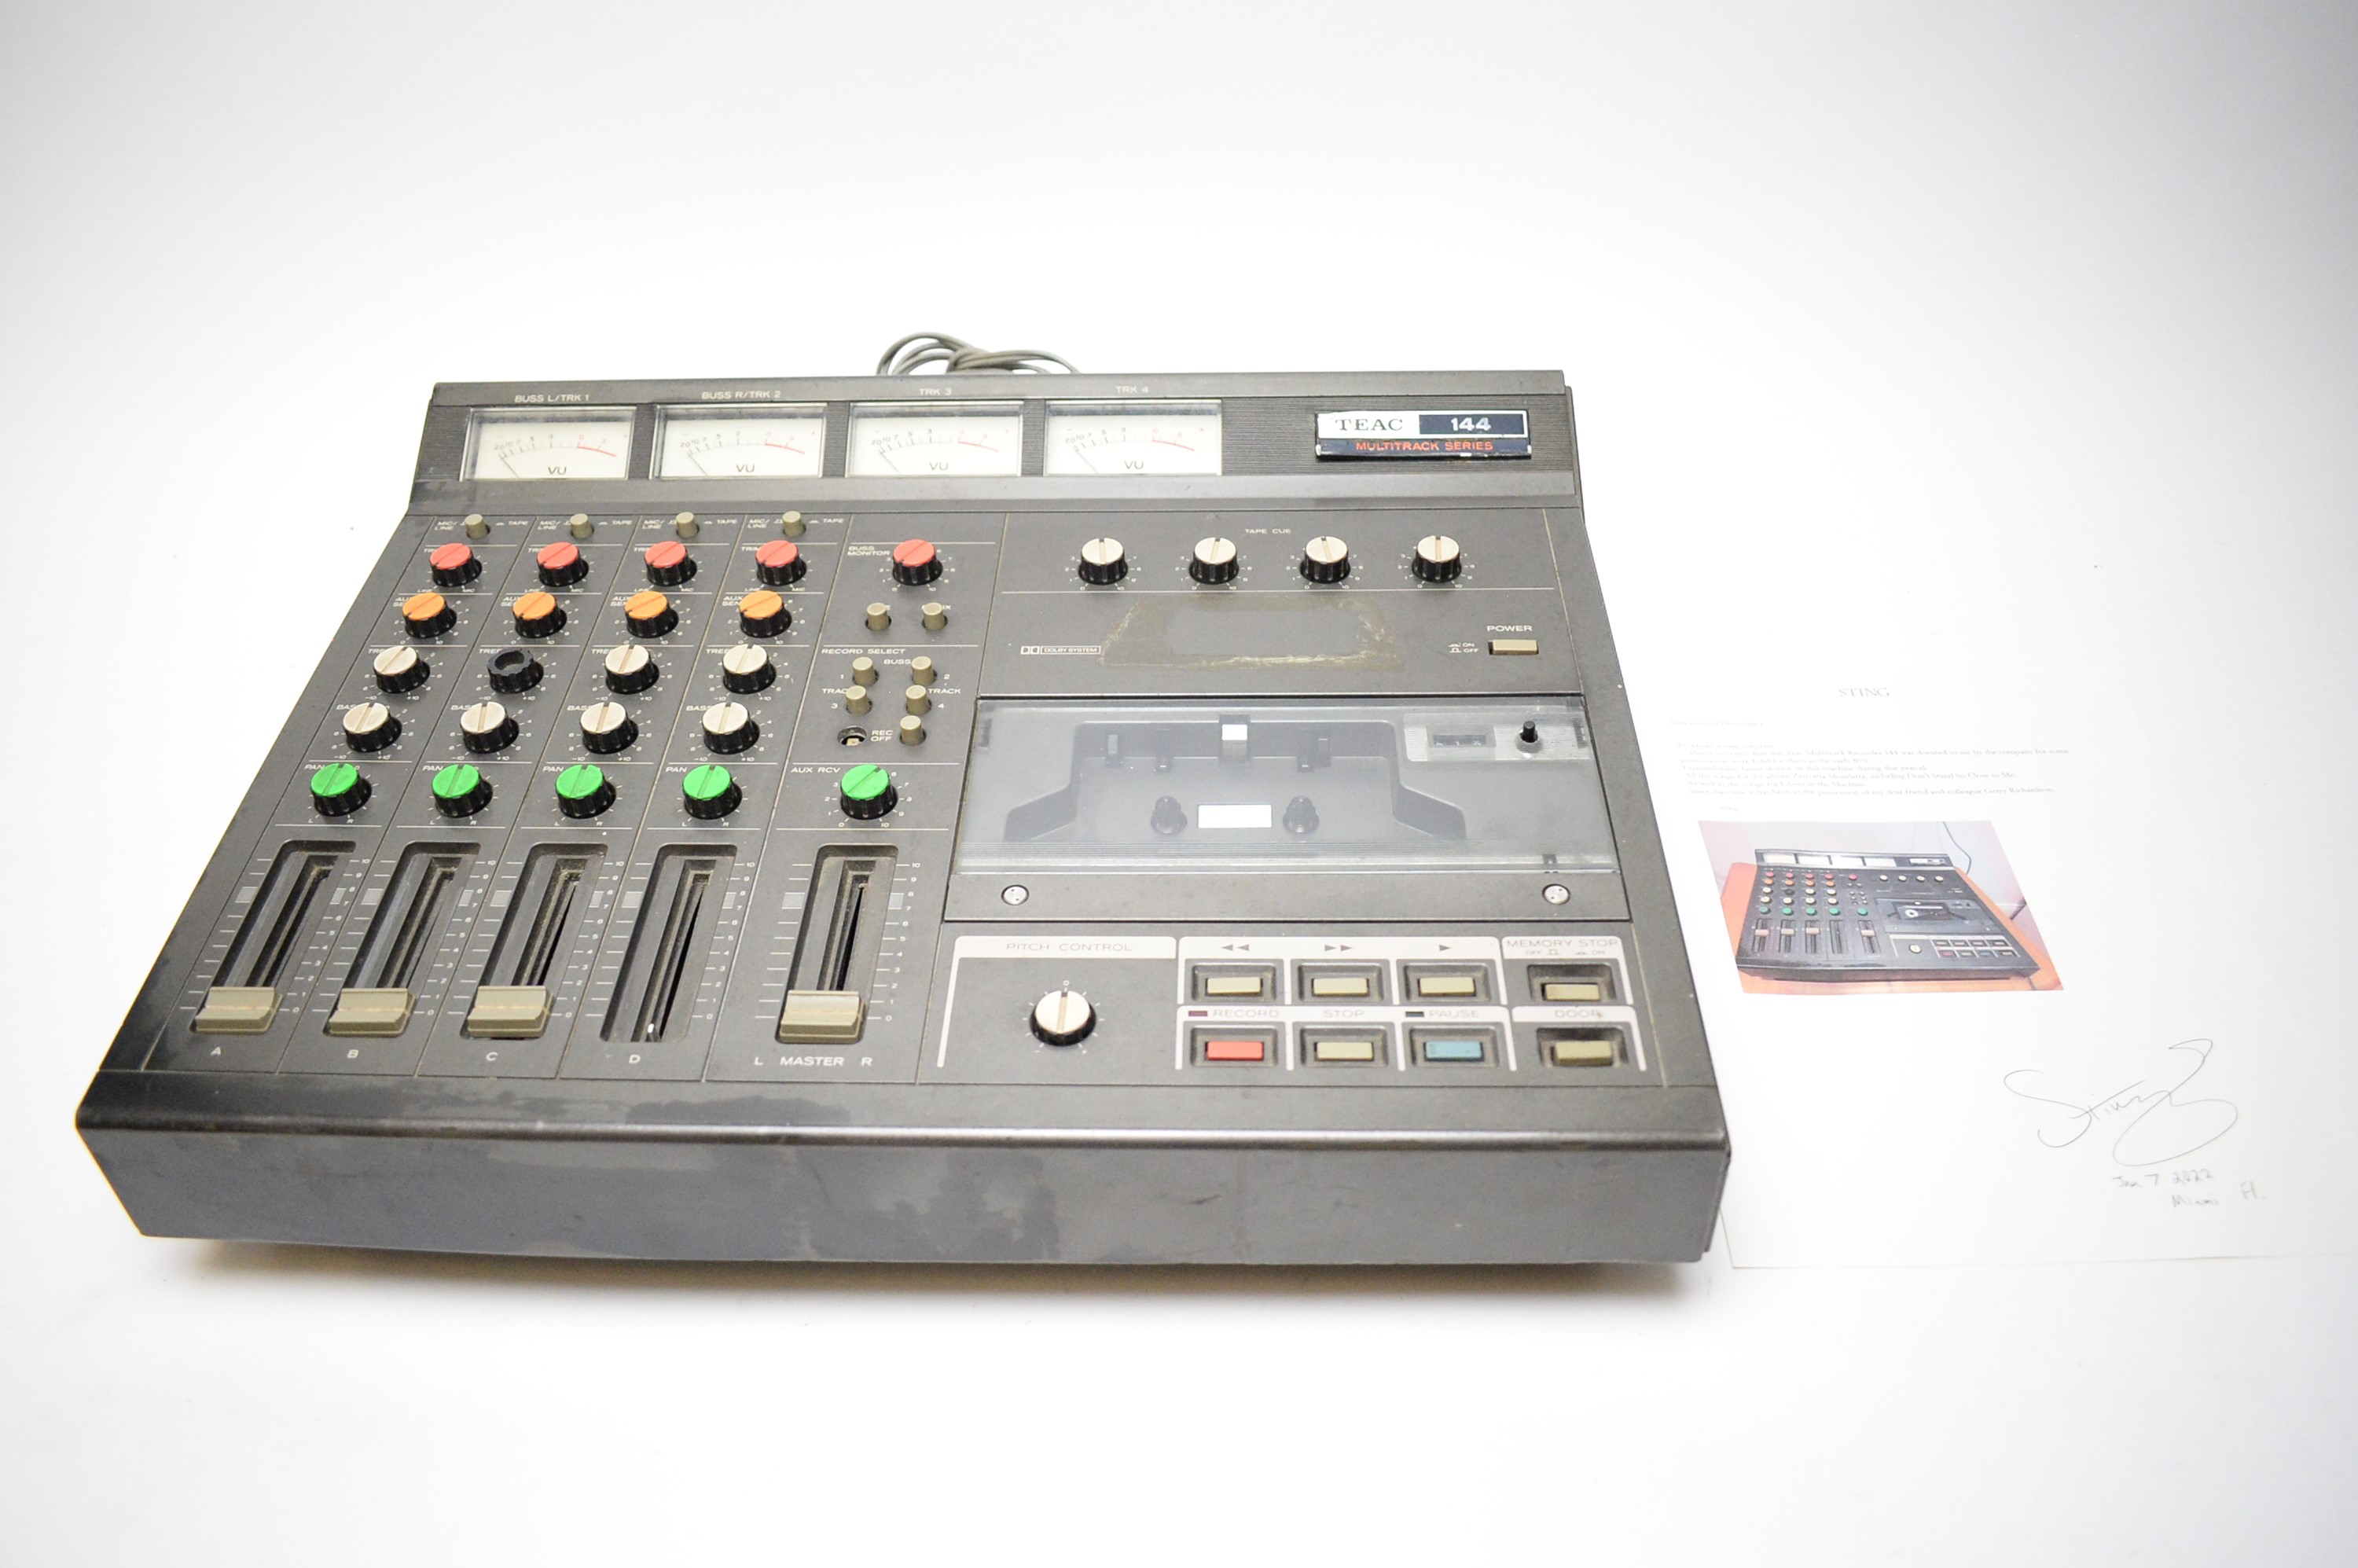 Sting’s early demo recorder up for auction